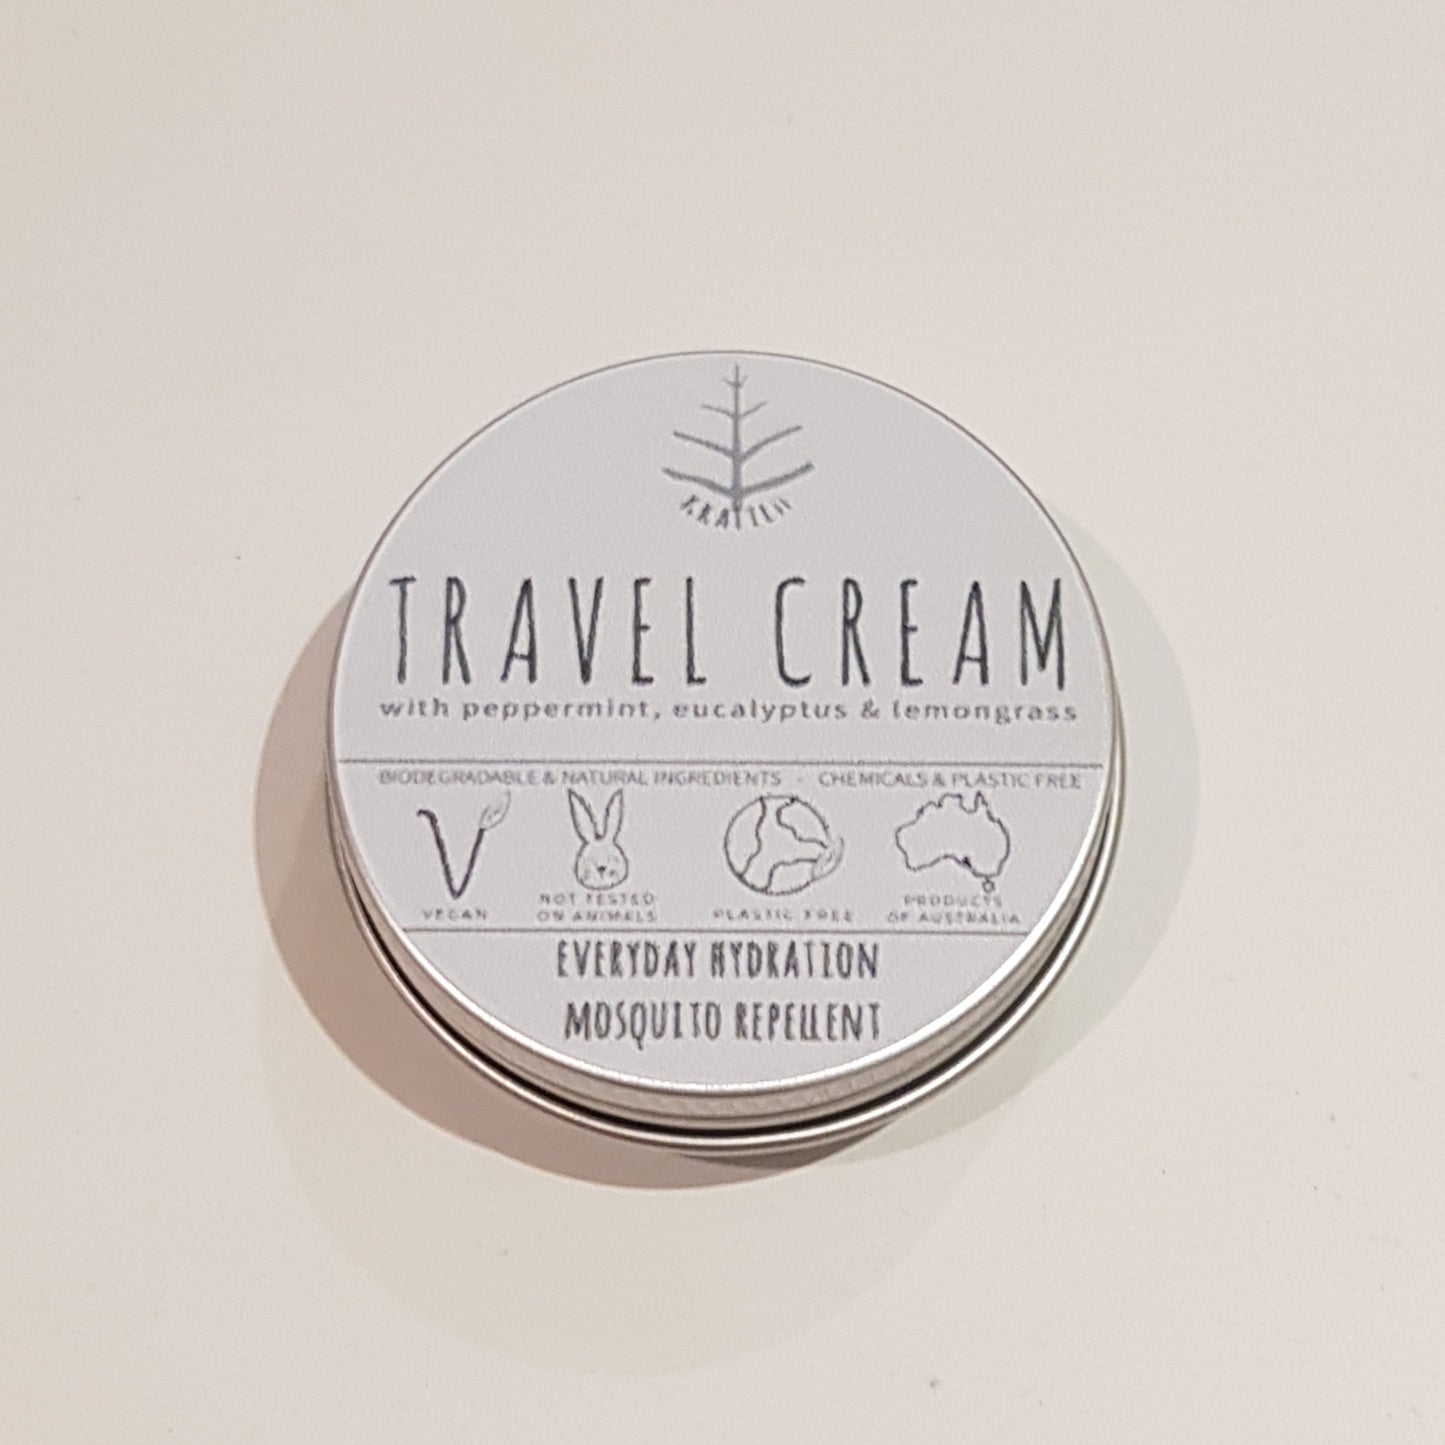 TRAVEL CREAM - all round body recovery